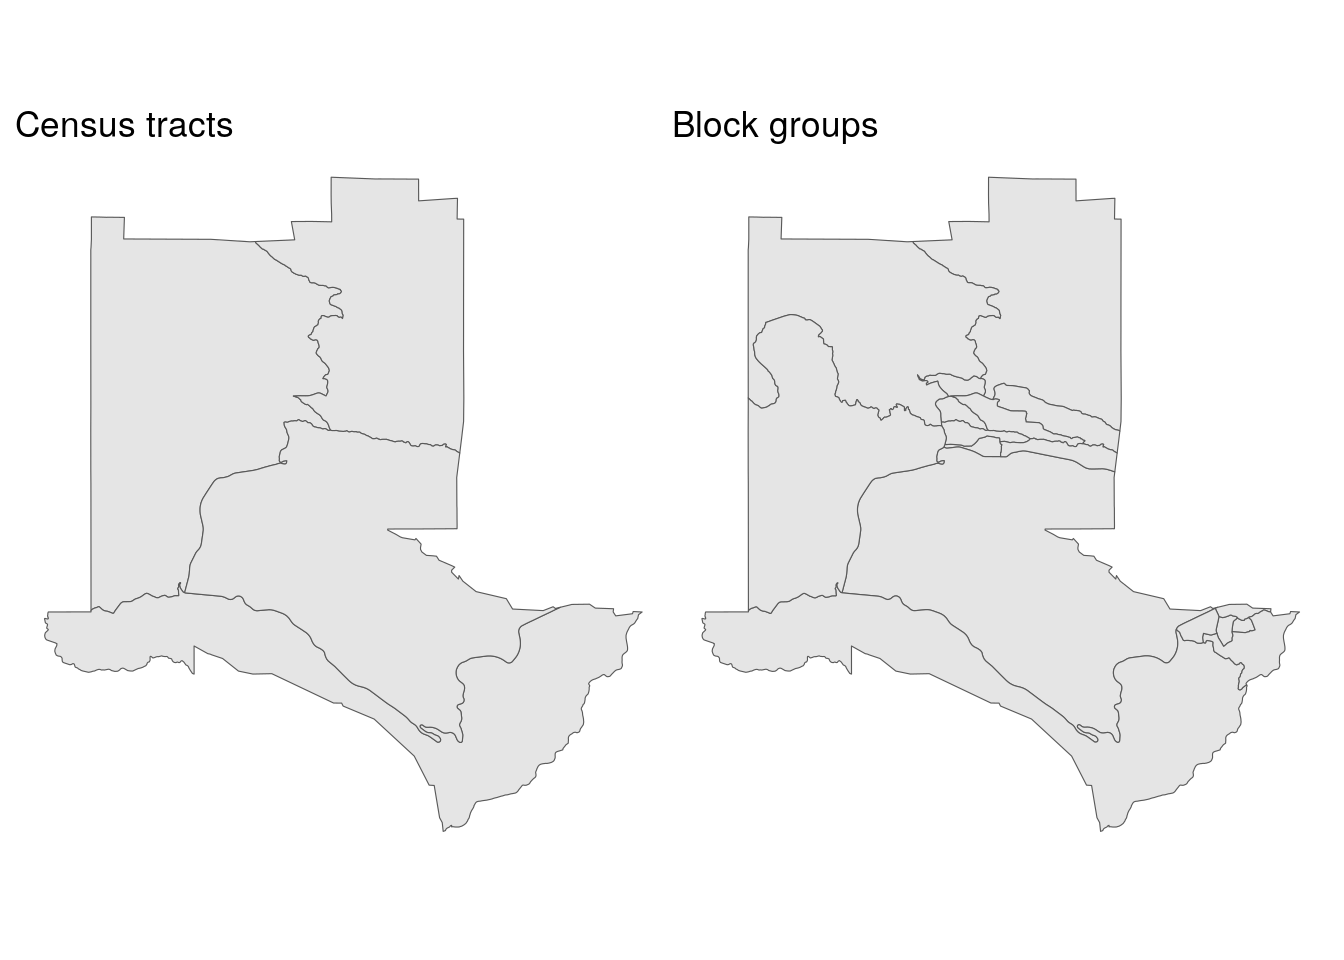 Comparing Census tracts and block groups